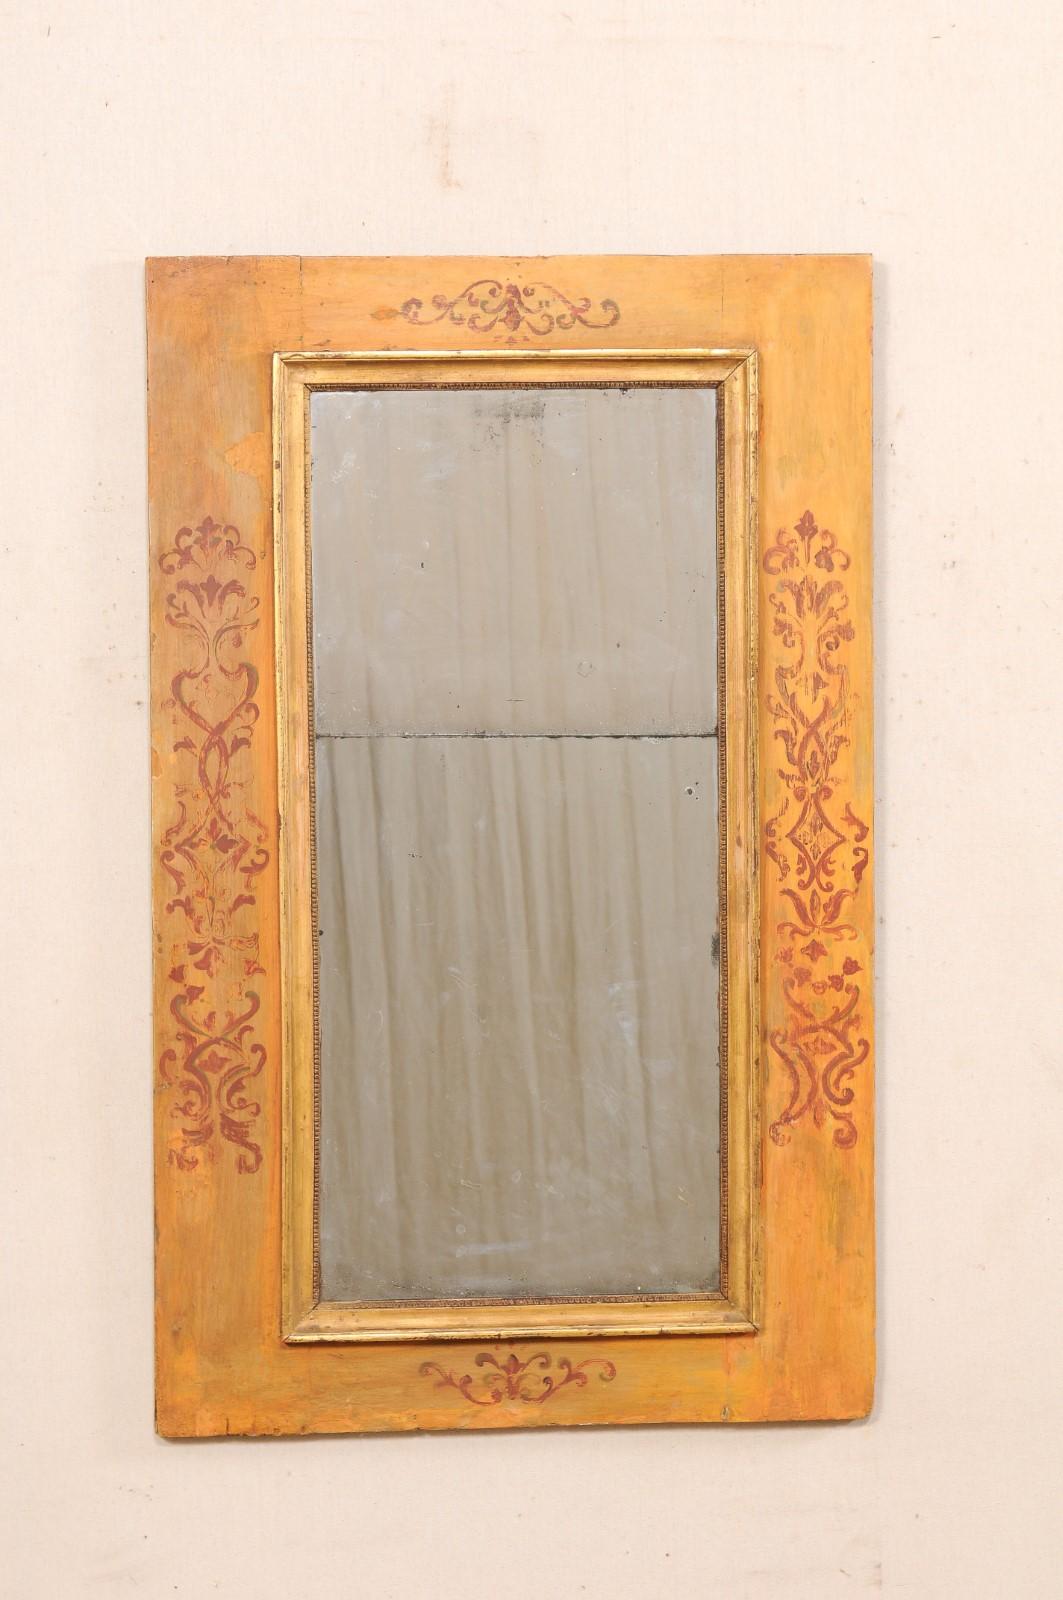 An Italian decoratively hand-painted wall mirror from the 18th century. This antique mirror from Italy has thick wood surround that has been hand-painted with foliate ornamentation about the central sections of each of the four sides. There is a